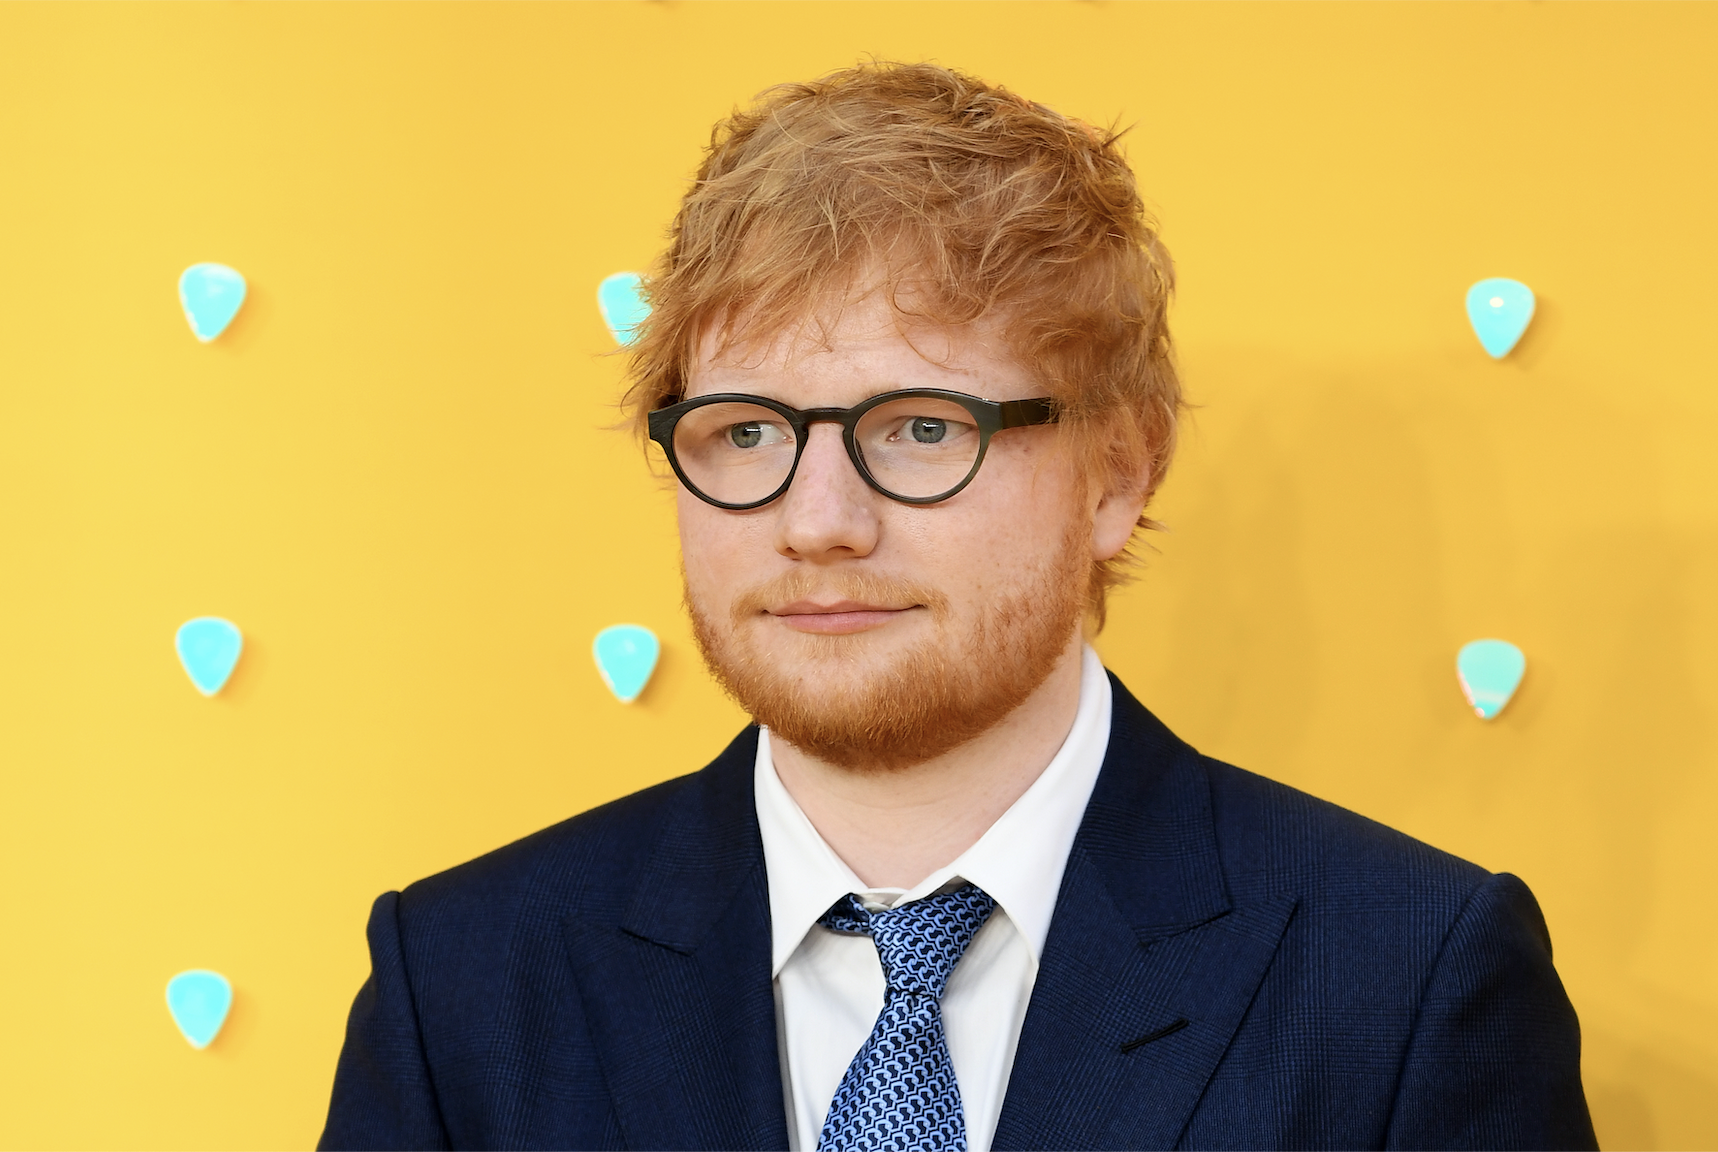 Ed Sheeran attends the UK Premiere of &quot;Yesterday&quot; at Odeon Luxe Leicester Square on June 18, 2019, in London, England